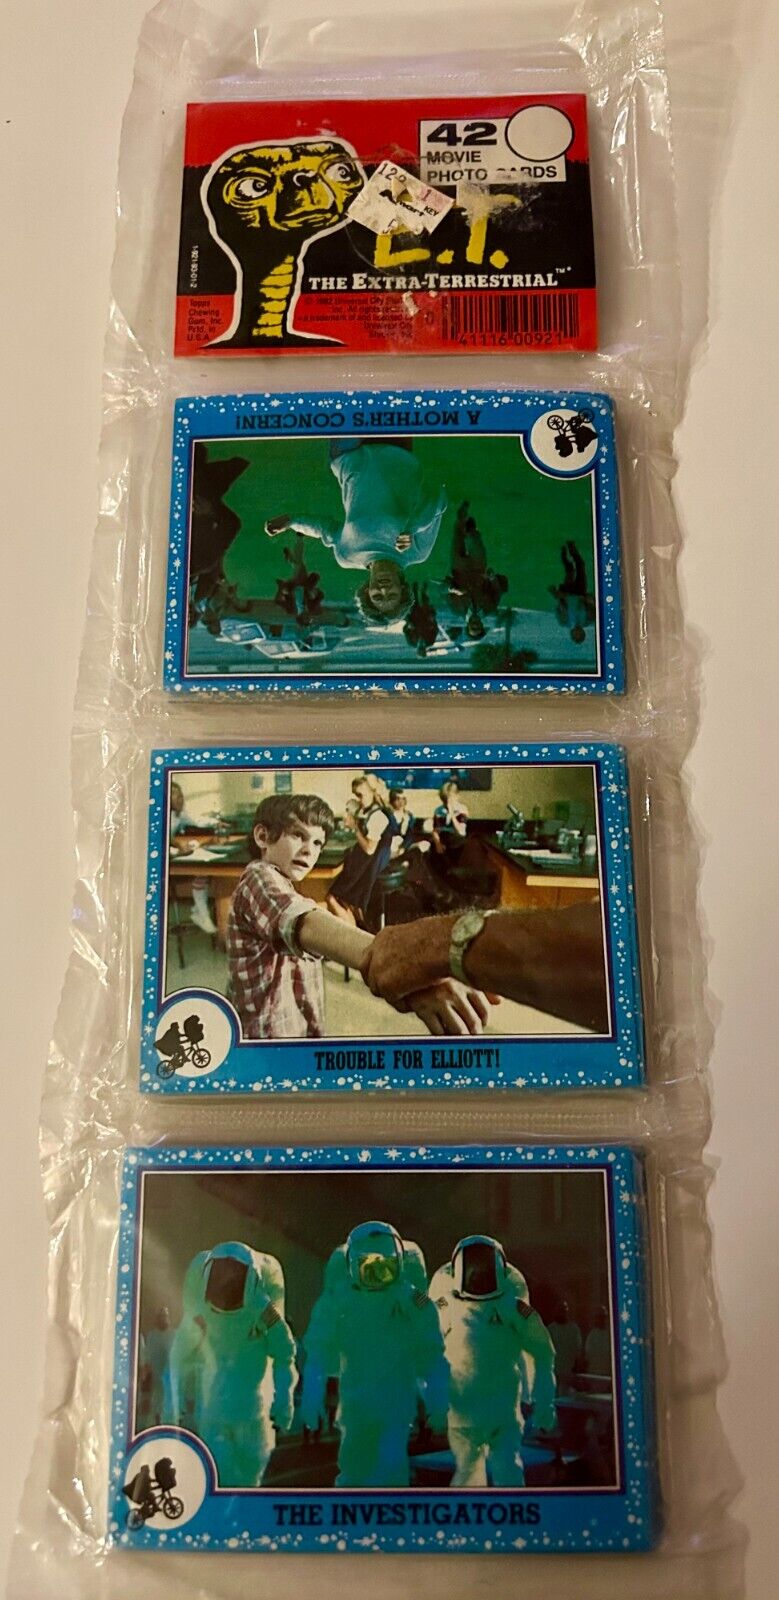 1982 Topps ~ E.T. Pack of 42 Movie Photo Cards Rack Pack UNOPENED Sealed